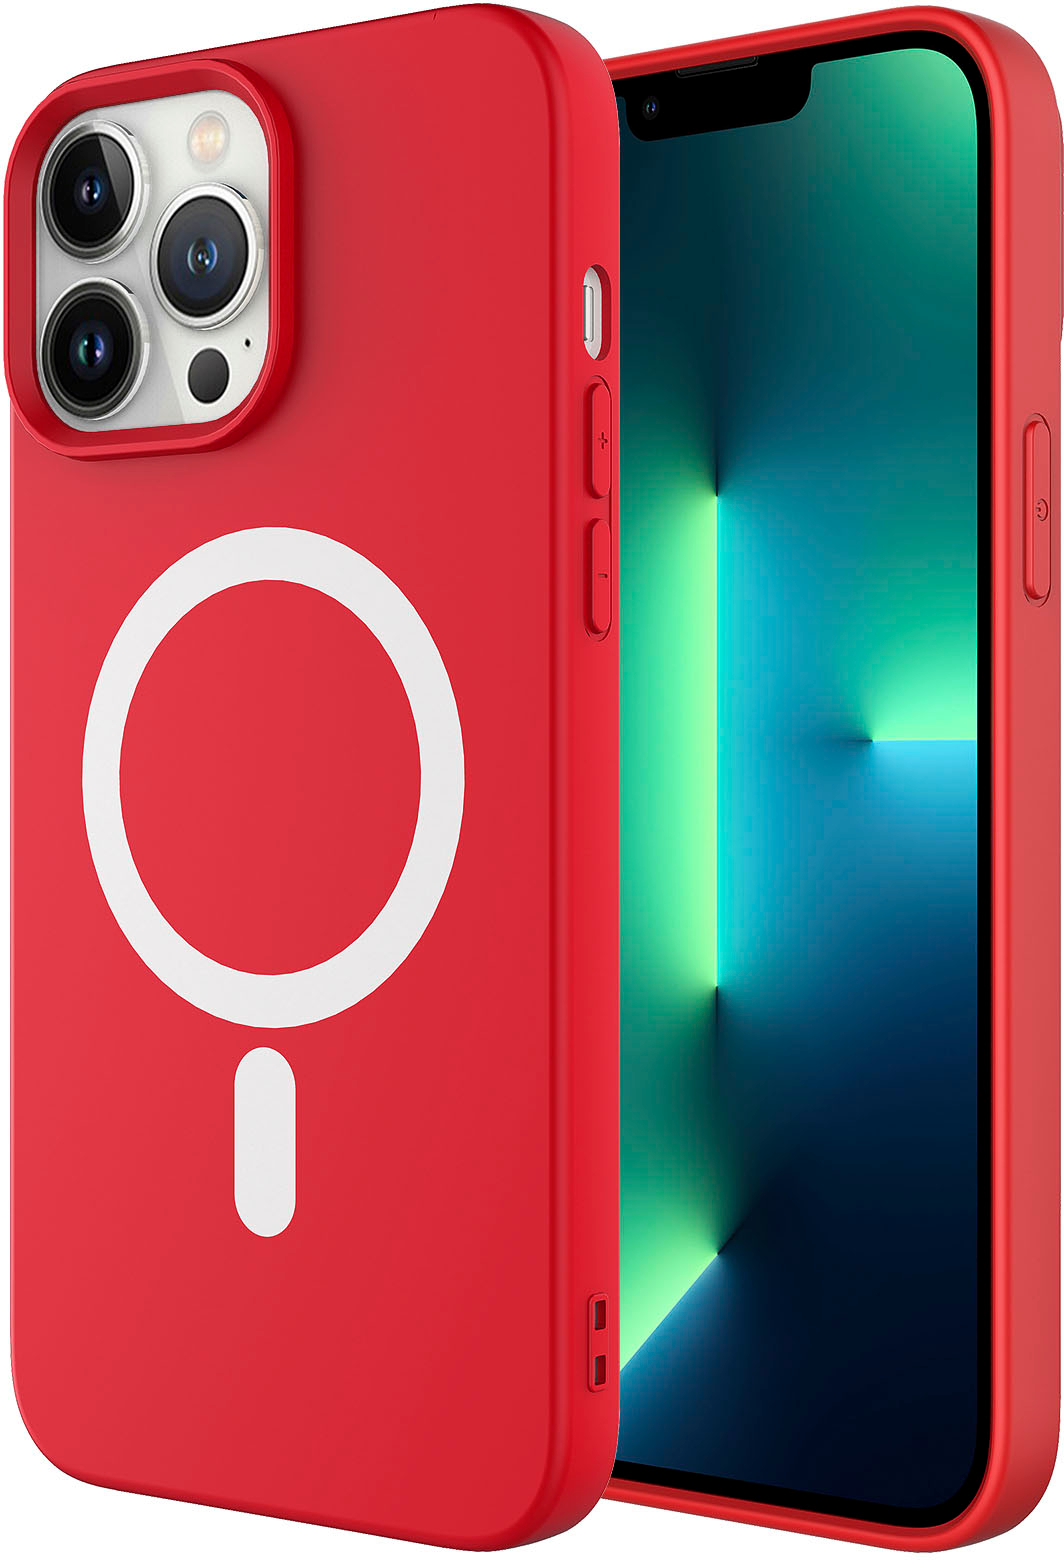 Angle View: AMPD - Real Feel Soft Case with MagSafe for Apple iPhone 13 Pro Max / iPhone 12 Pro Max - Red